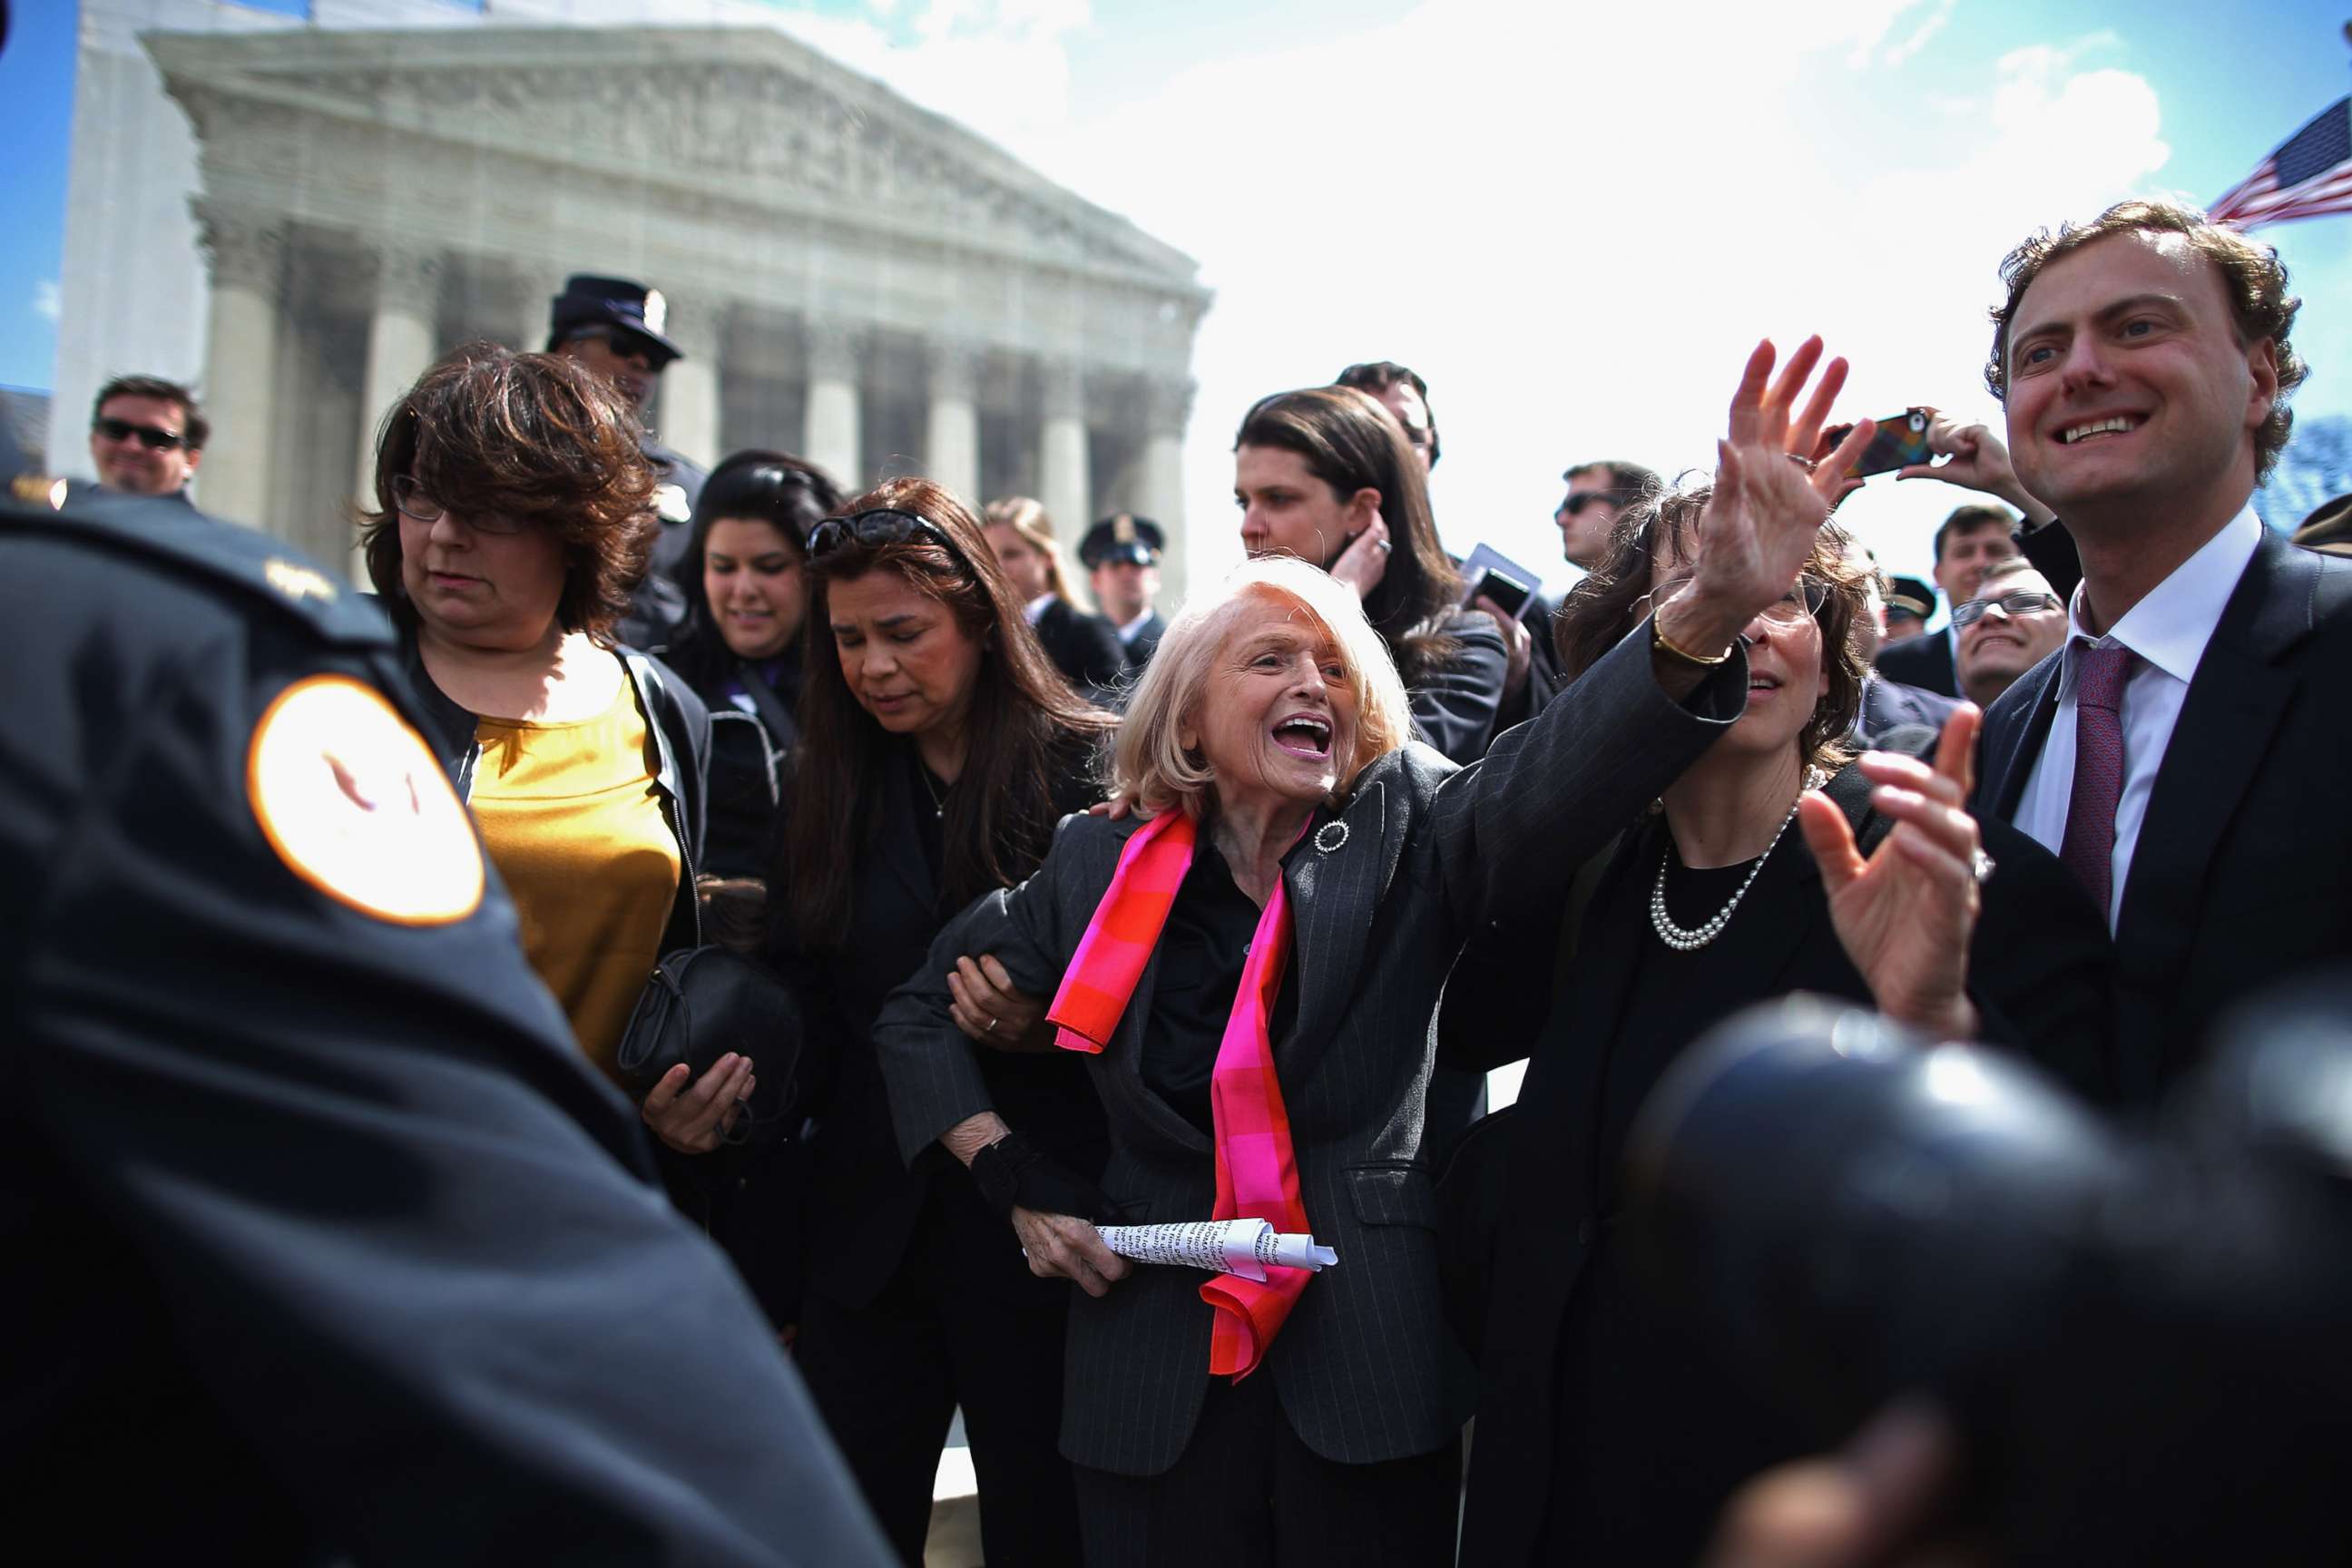 PHOTO: Edith Windsor, 83, is mobbed by journalists and supporters as she leaves the Supreme Court March 27, 2013 in Washington. 